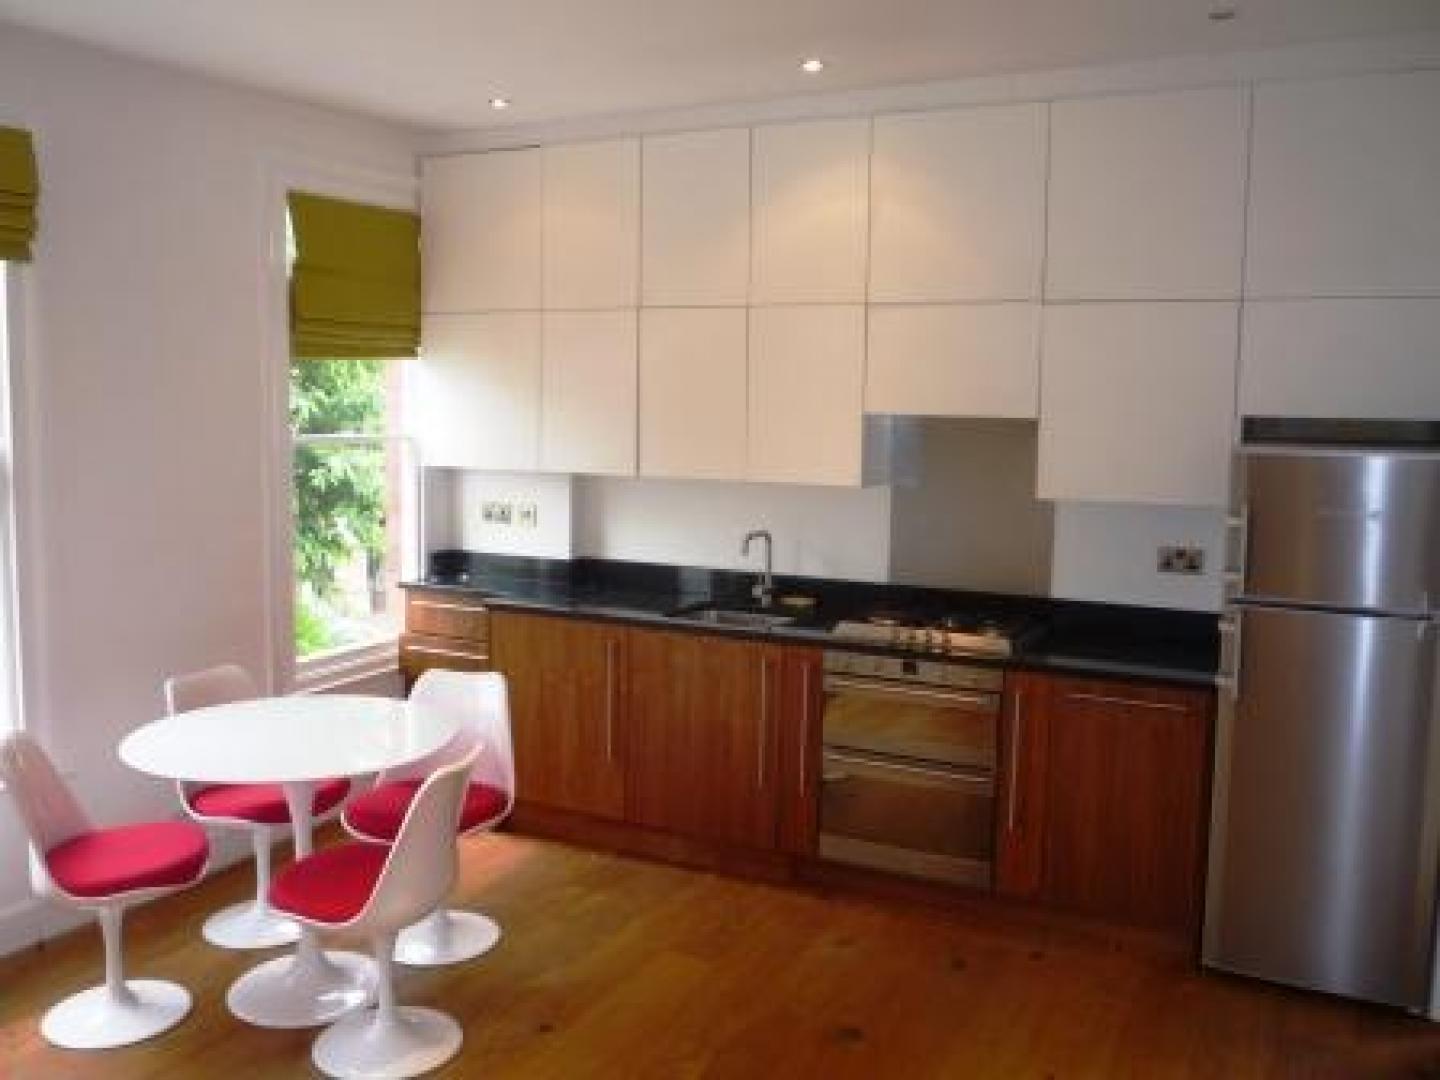 			AMAZING FLAT!, 2 Bedroom, 1 bath, 1 reception Flat			 Palace Road, CROUCH END